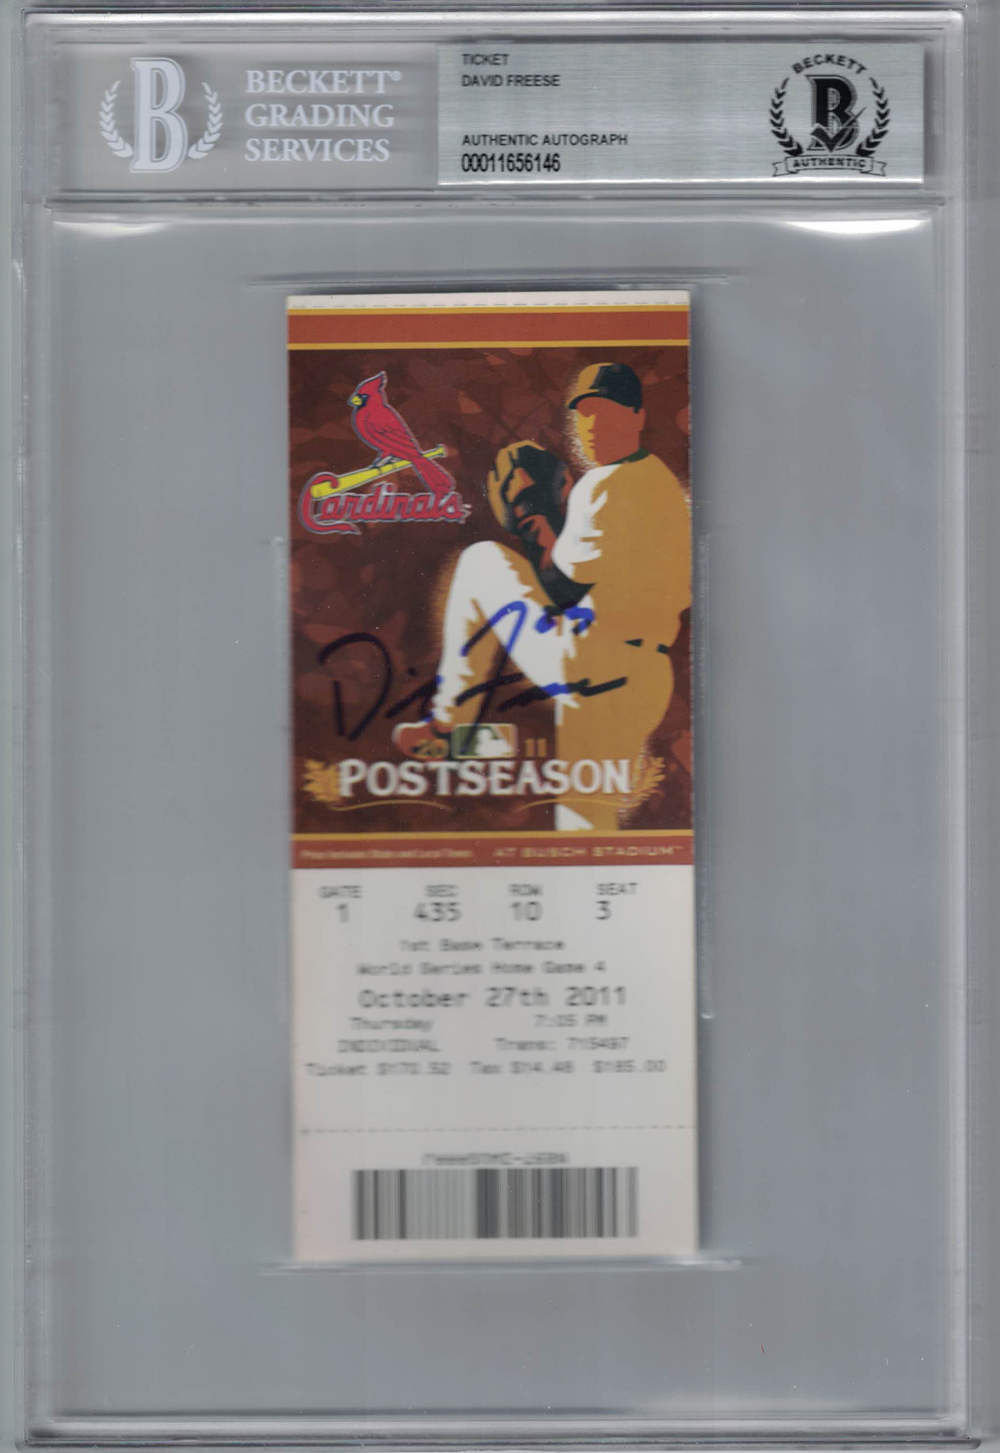 David Freese Autographed/Signed 2011 World Series Game 7 Ticket BAS Slab 25243